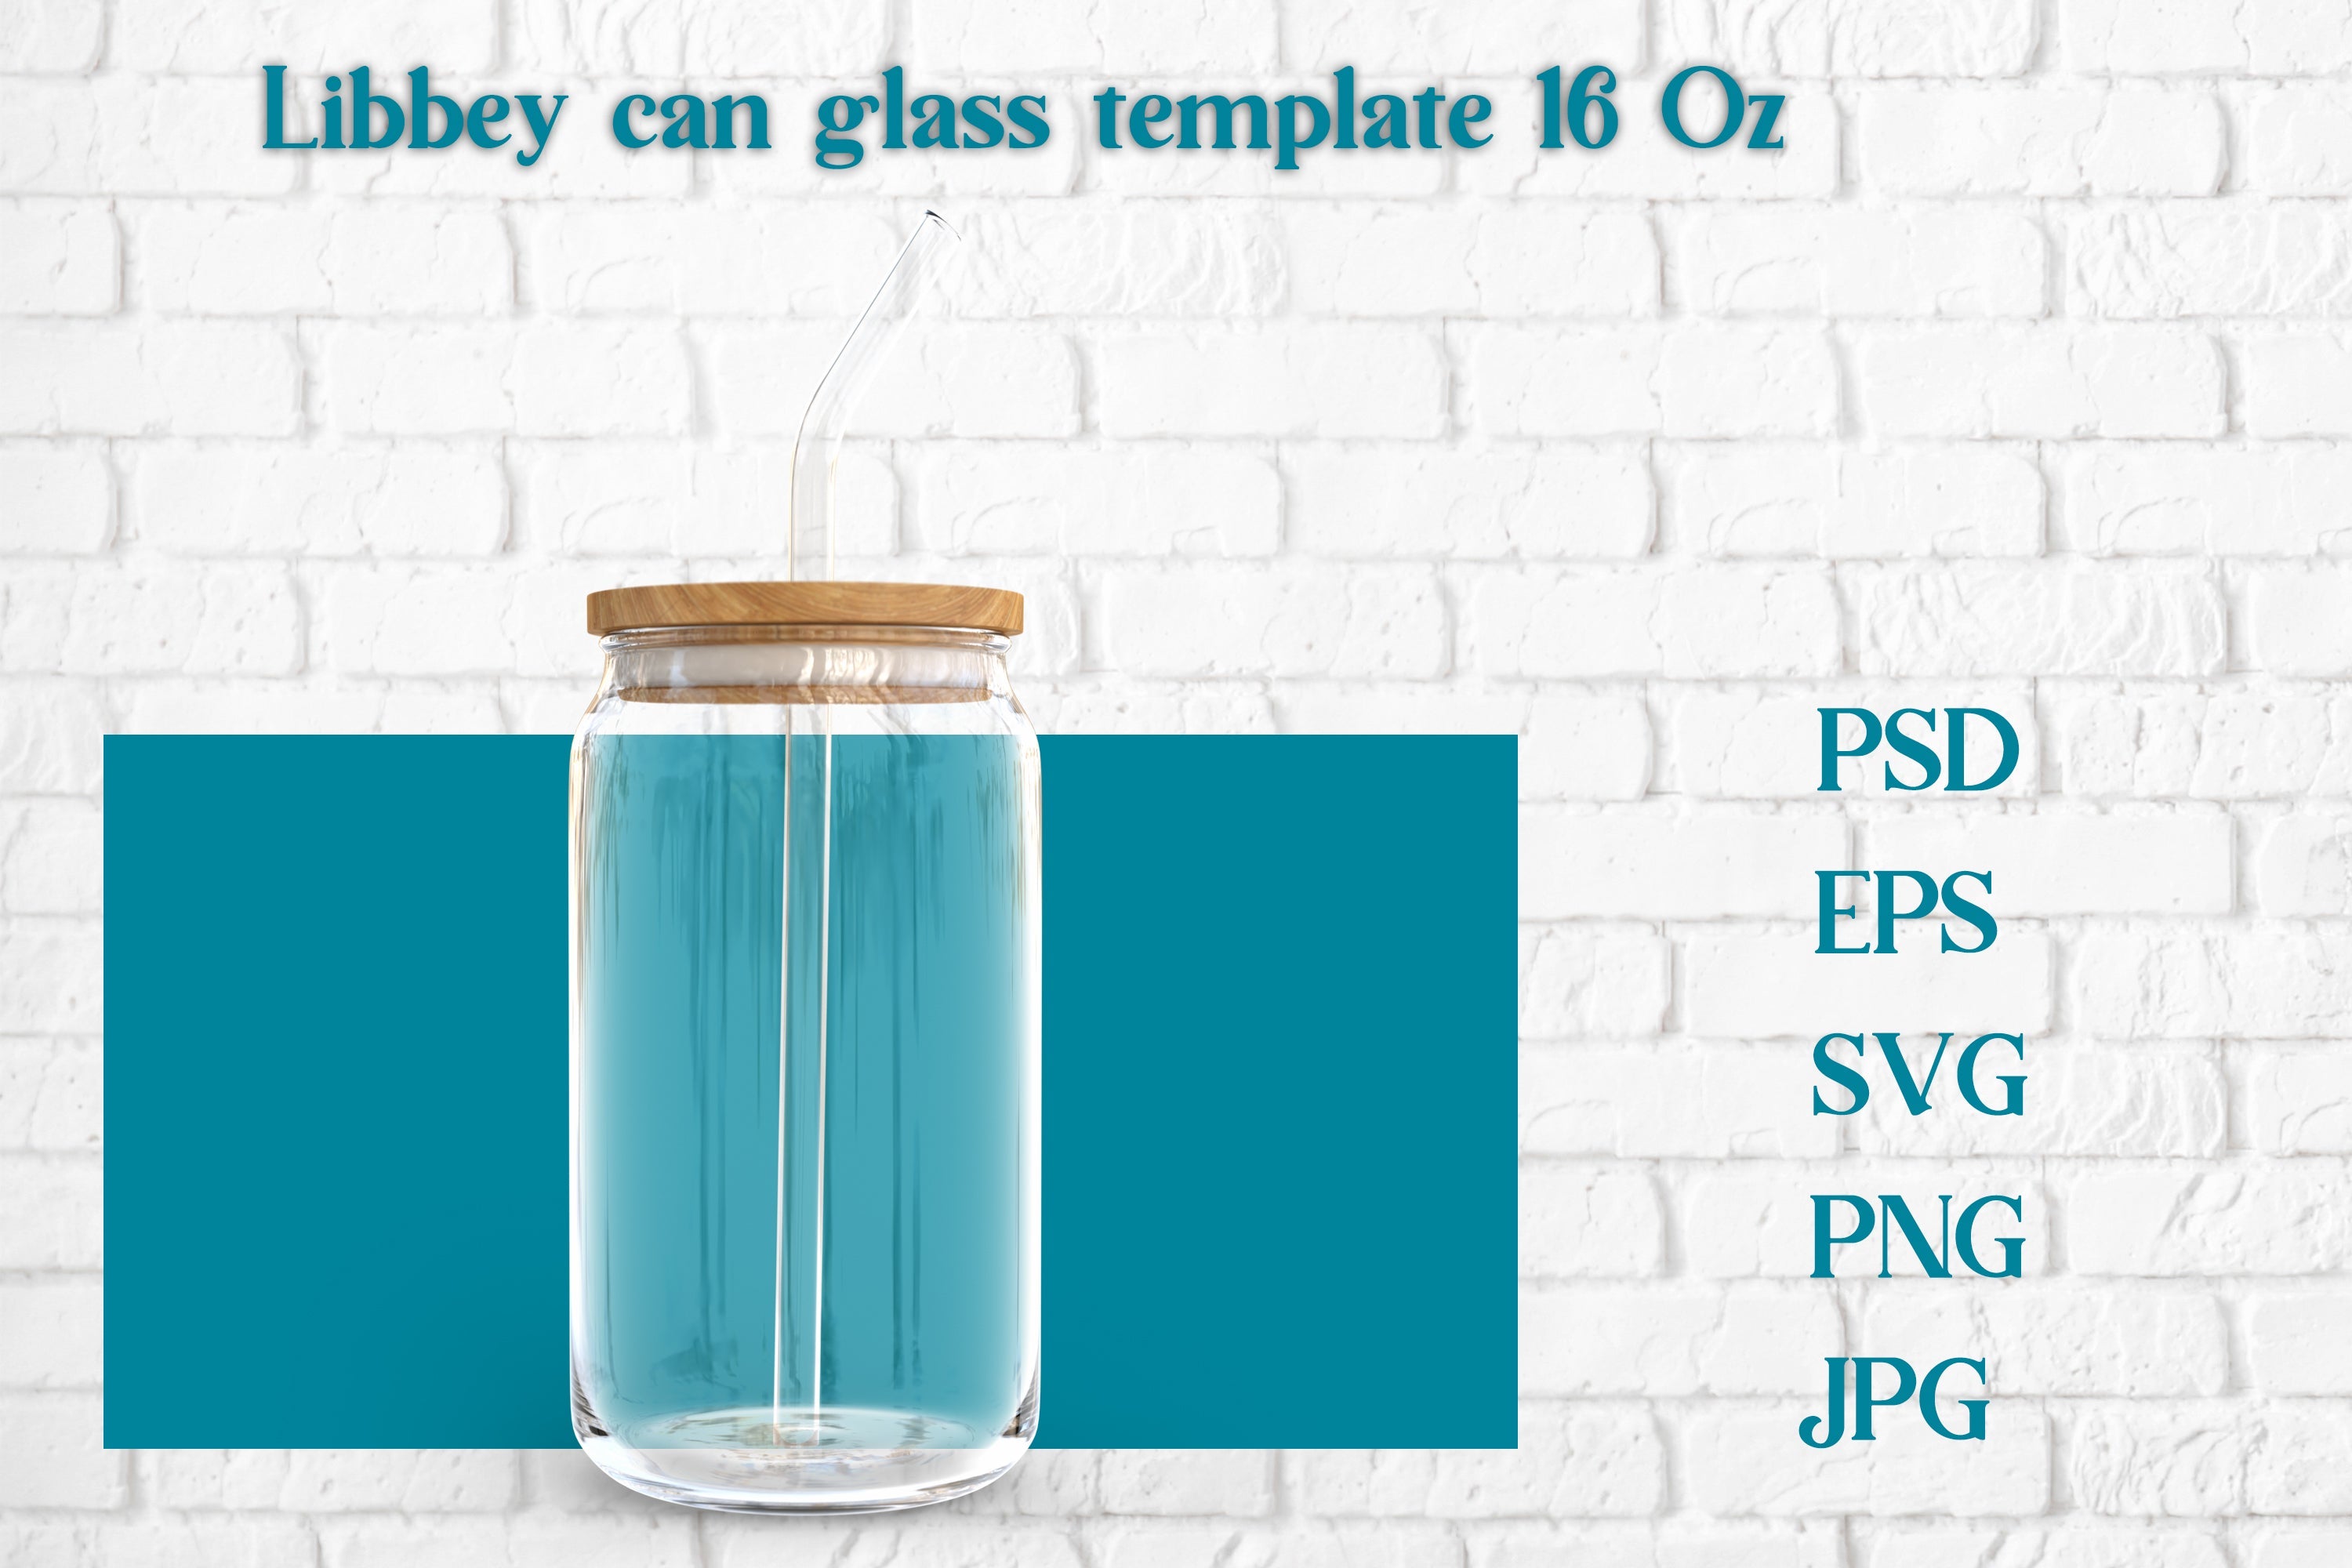 GLASS CAN TEMPLATES  16oz and 20oz Can Glass Wrap Templates